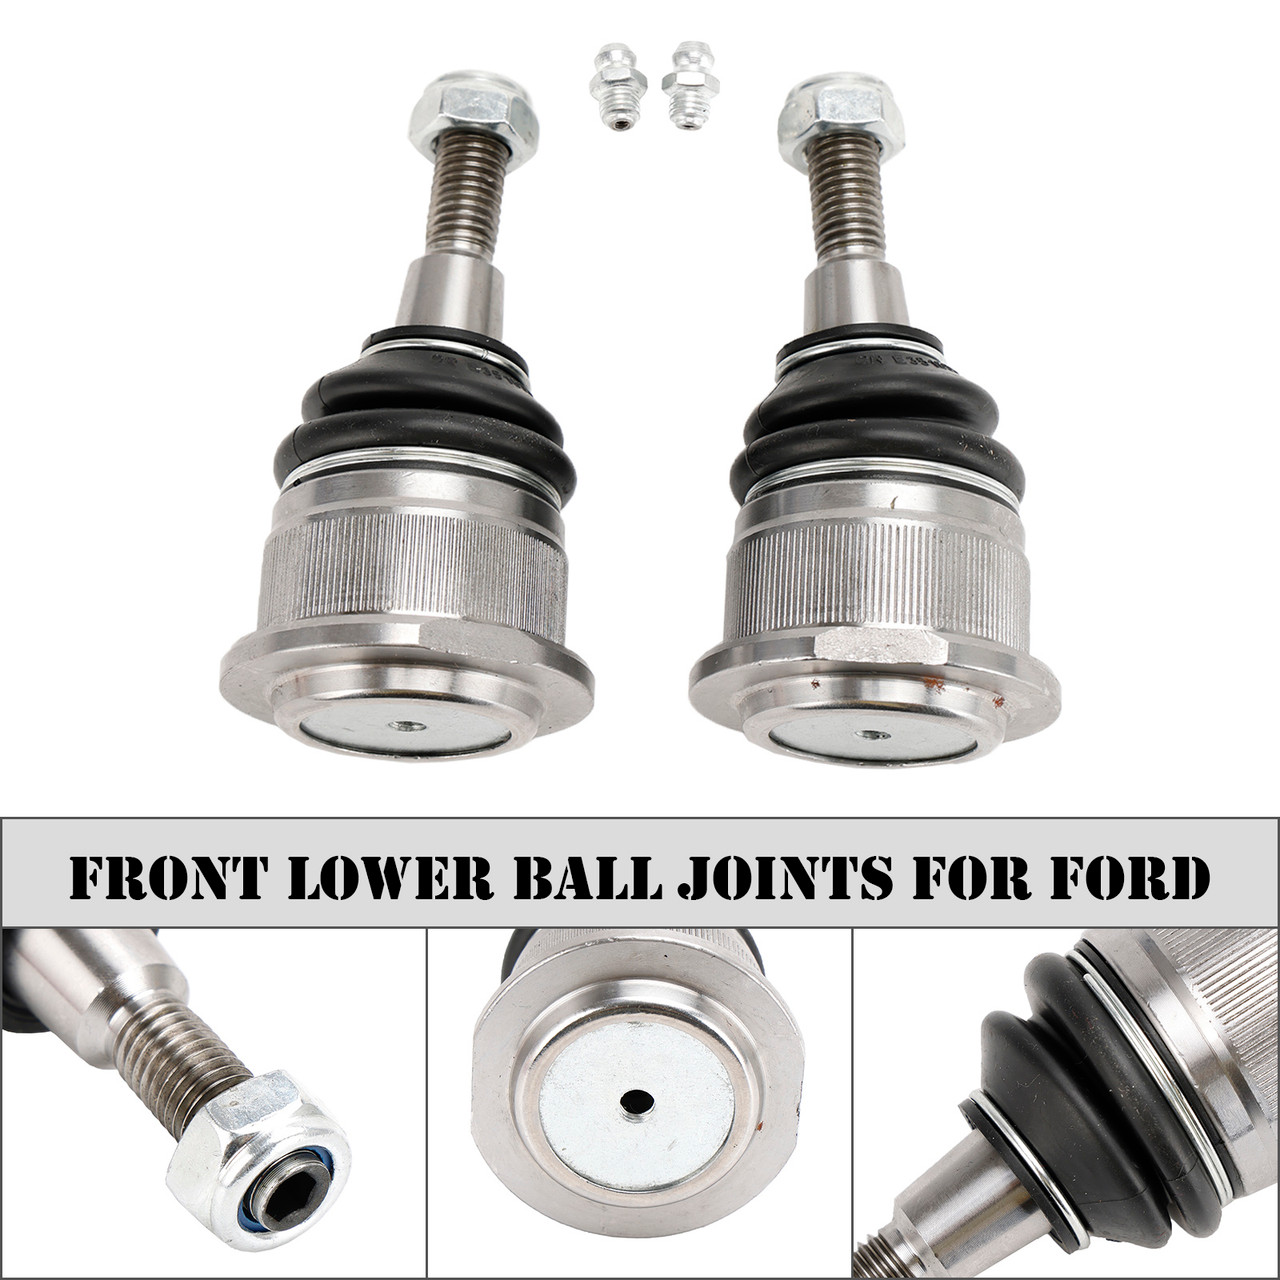 BA3395A 2002-2005 Ford Falcon BA 2005-2011 Ford Falcon BF 1998-2002 Falcon AU1 6CYL 4.0L & V8 5.4L Pair Front Lower Ball Joints